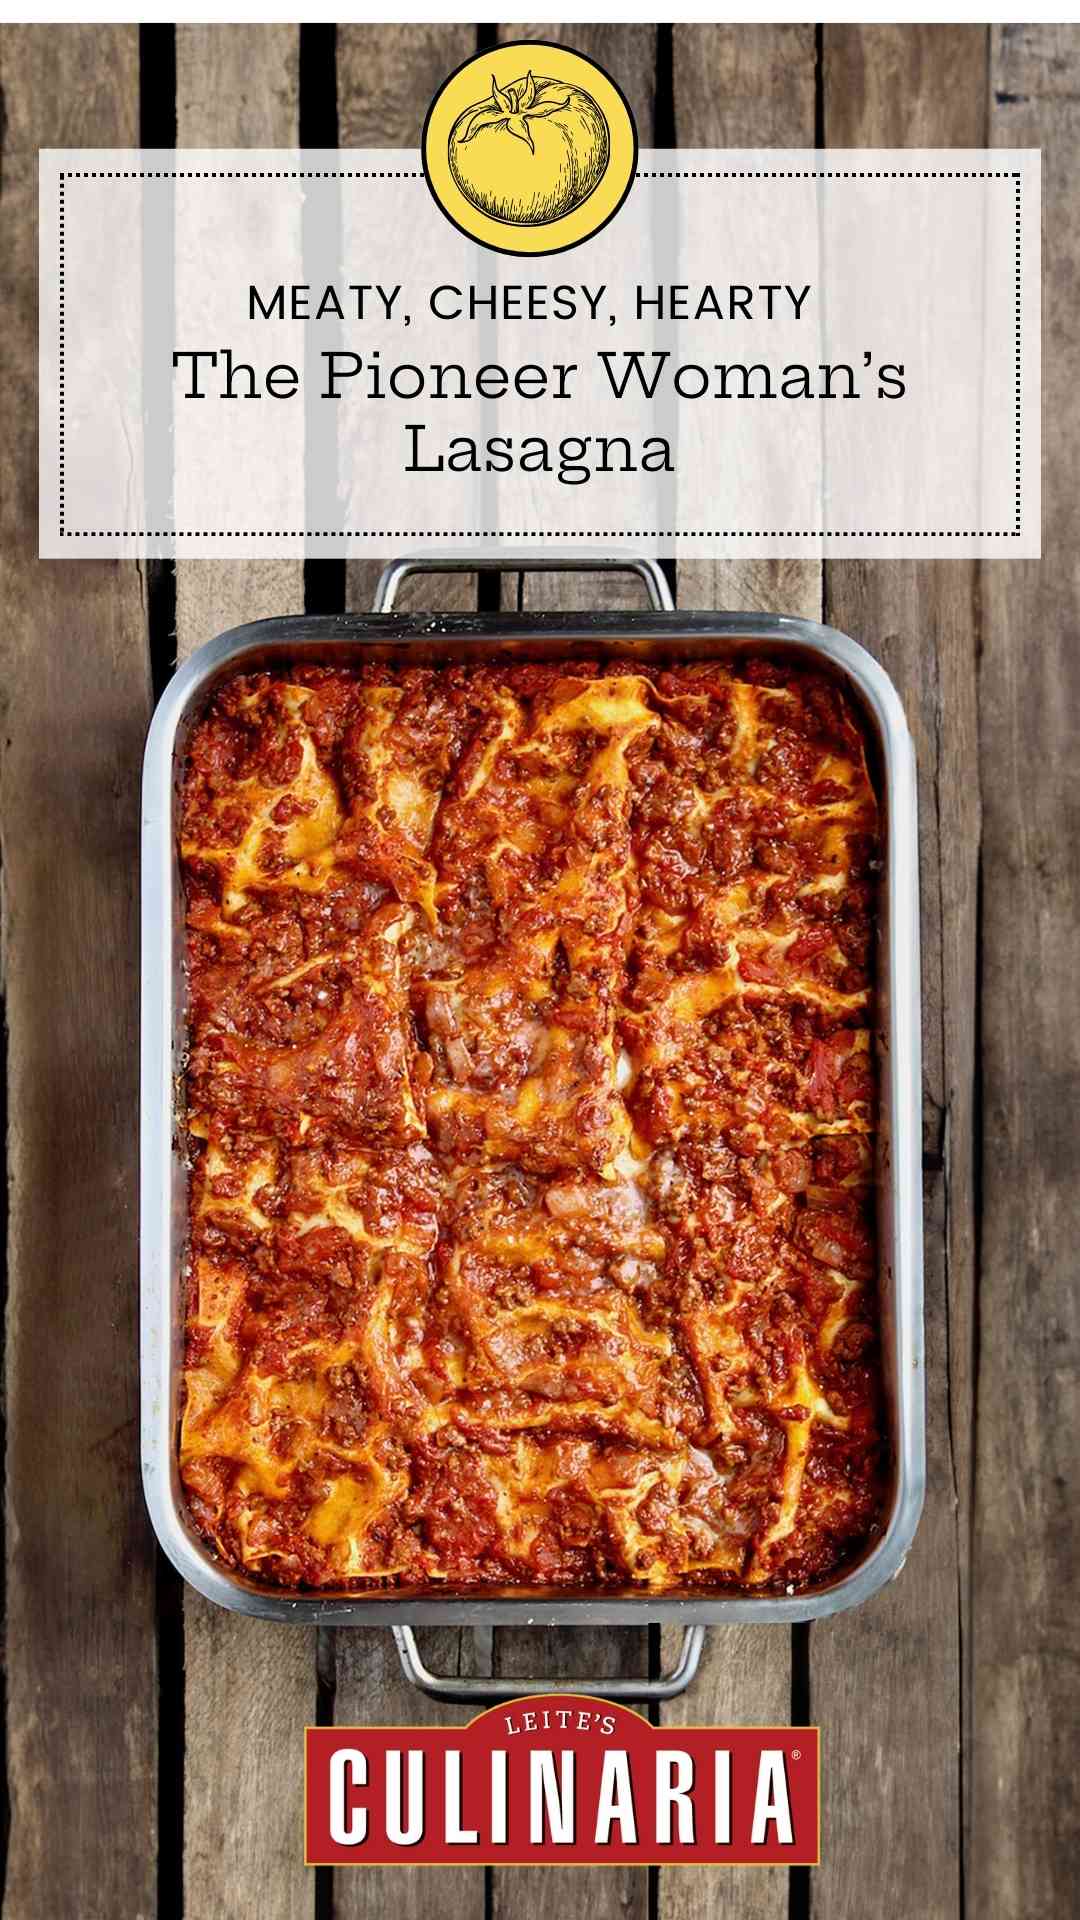 A metal baking dish filled with the Pioneer Woman's favorite lasagna on a wooden table.